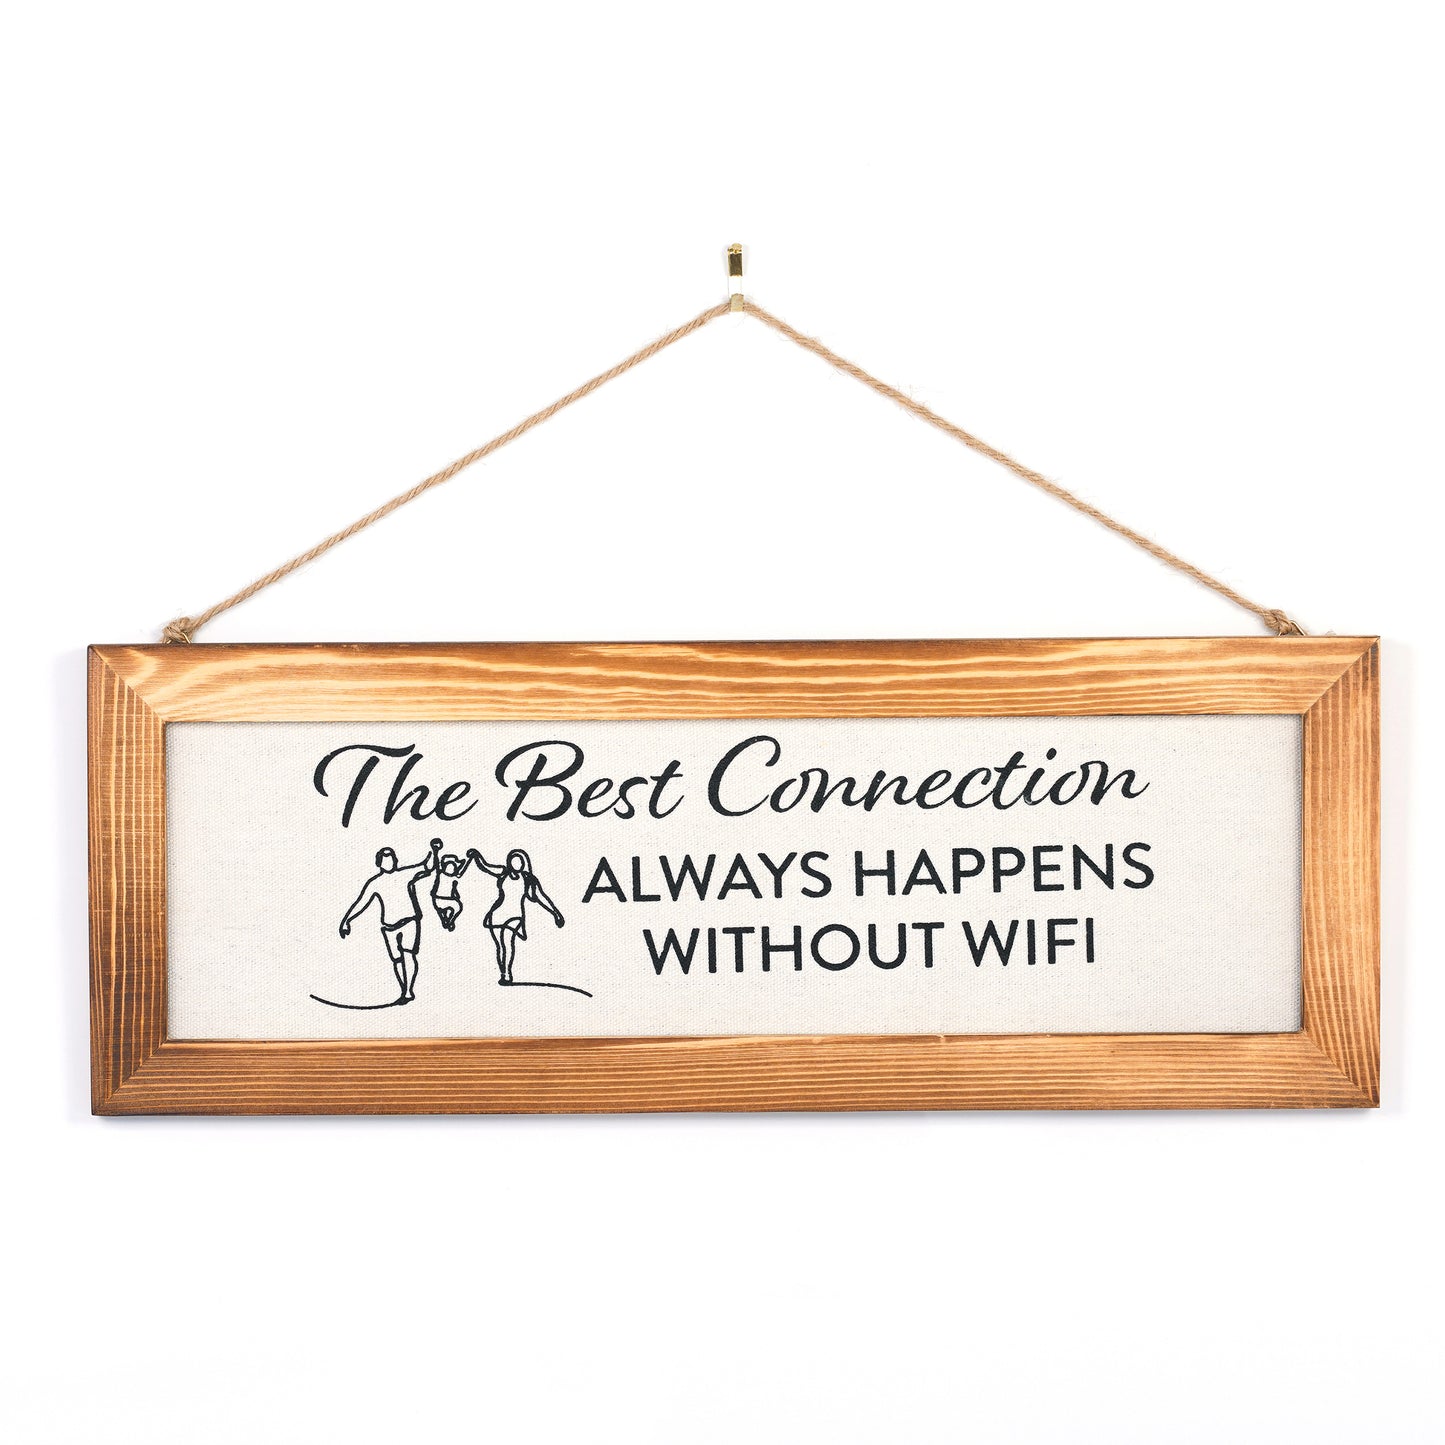 The Best Connections Always Happens Without Wifi - 16" x 6" Canvas Sign